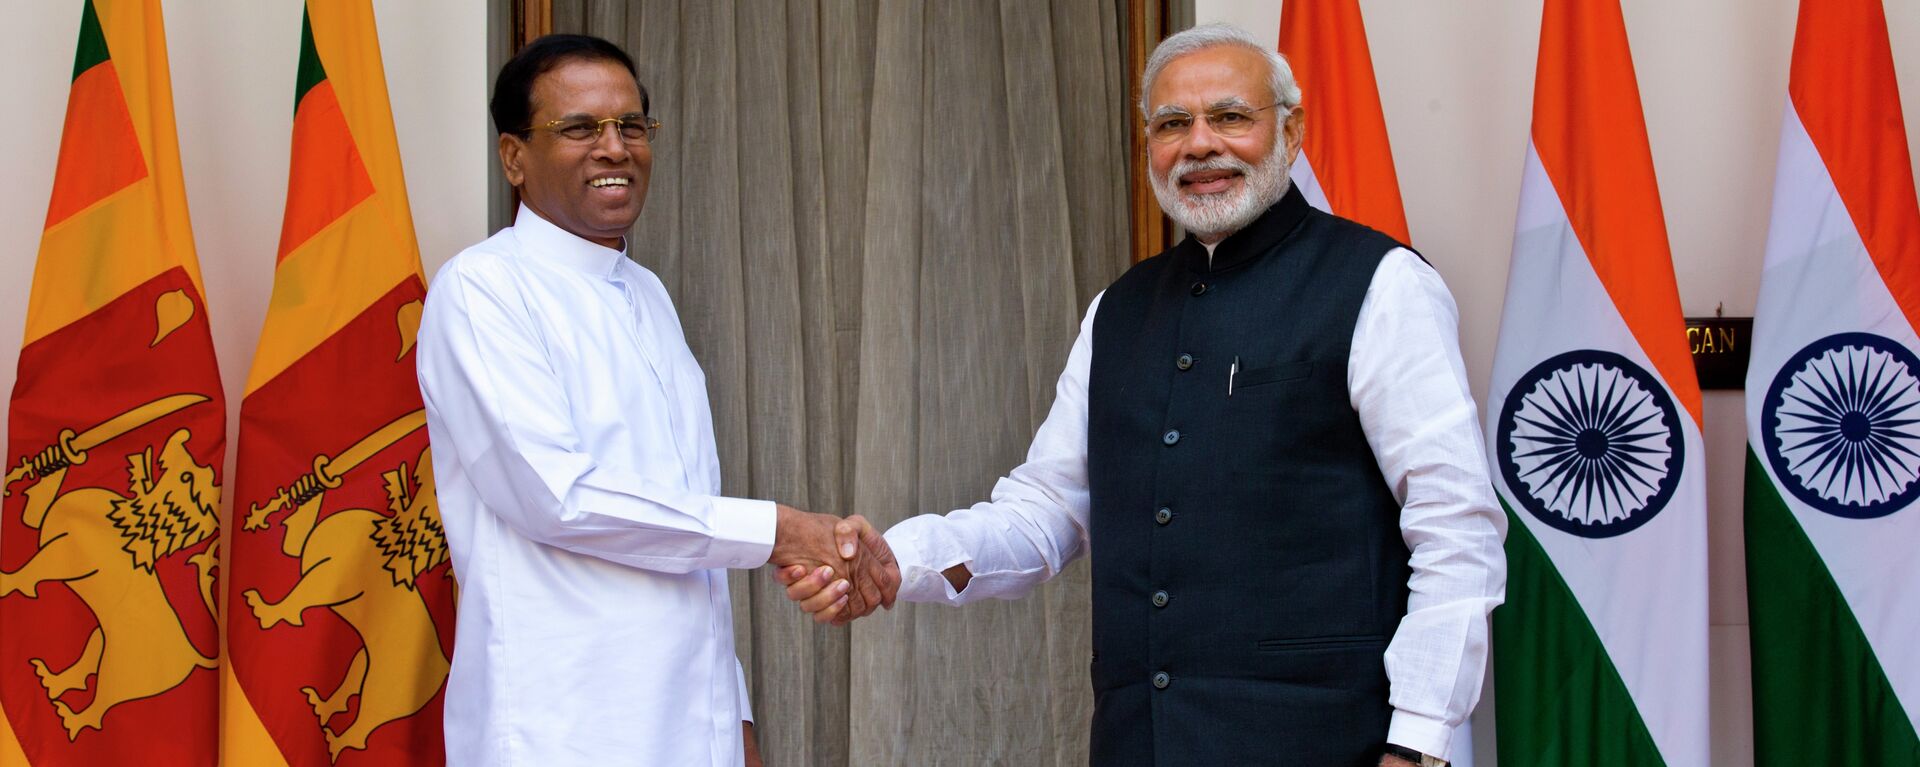 Sri Lanka’s President Maithripala Sirisena, left, and Indian Prime Minister Narendra Modi shake hands as they pose for photos before their meeting in New Delhi, India, Monday, Feb. 16, 2015 - Sputnik India, 1920, 28.10.2023